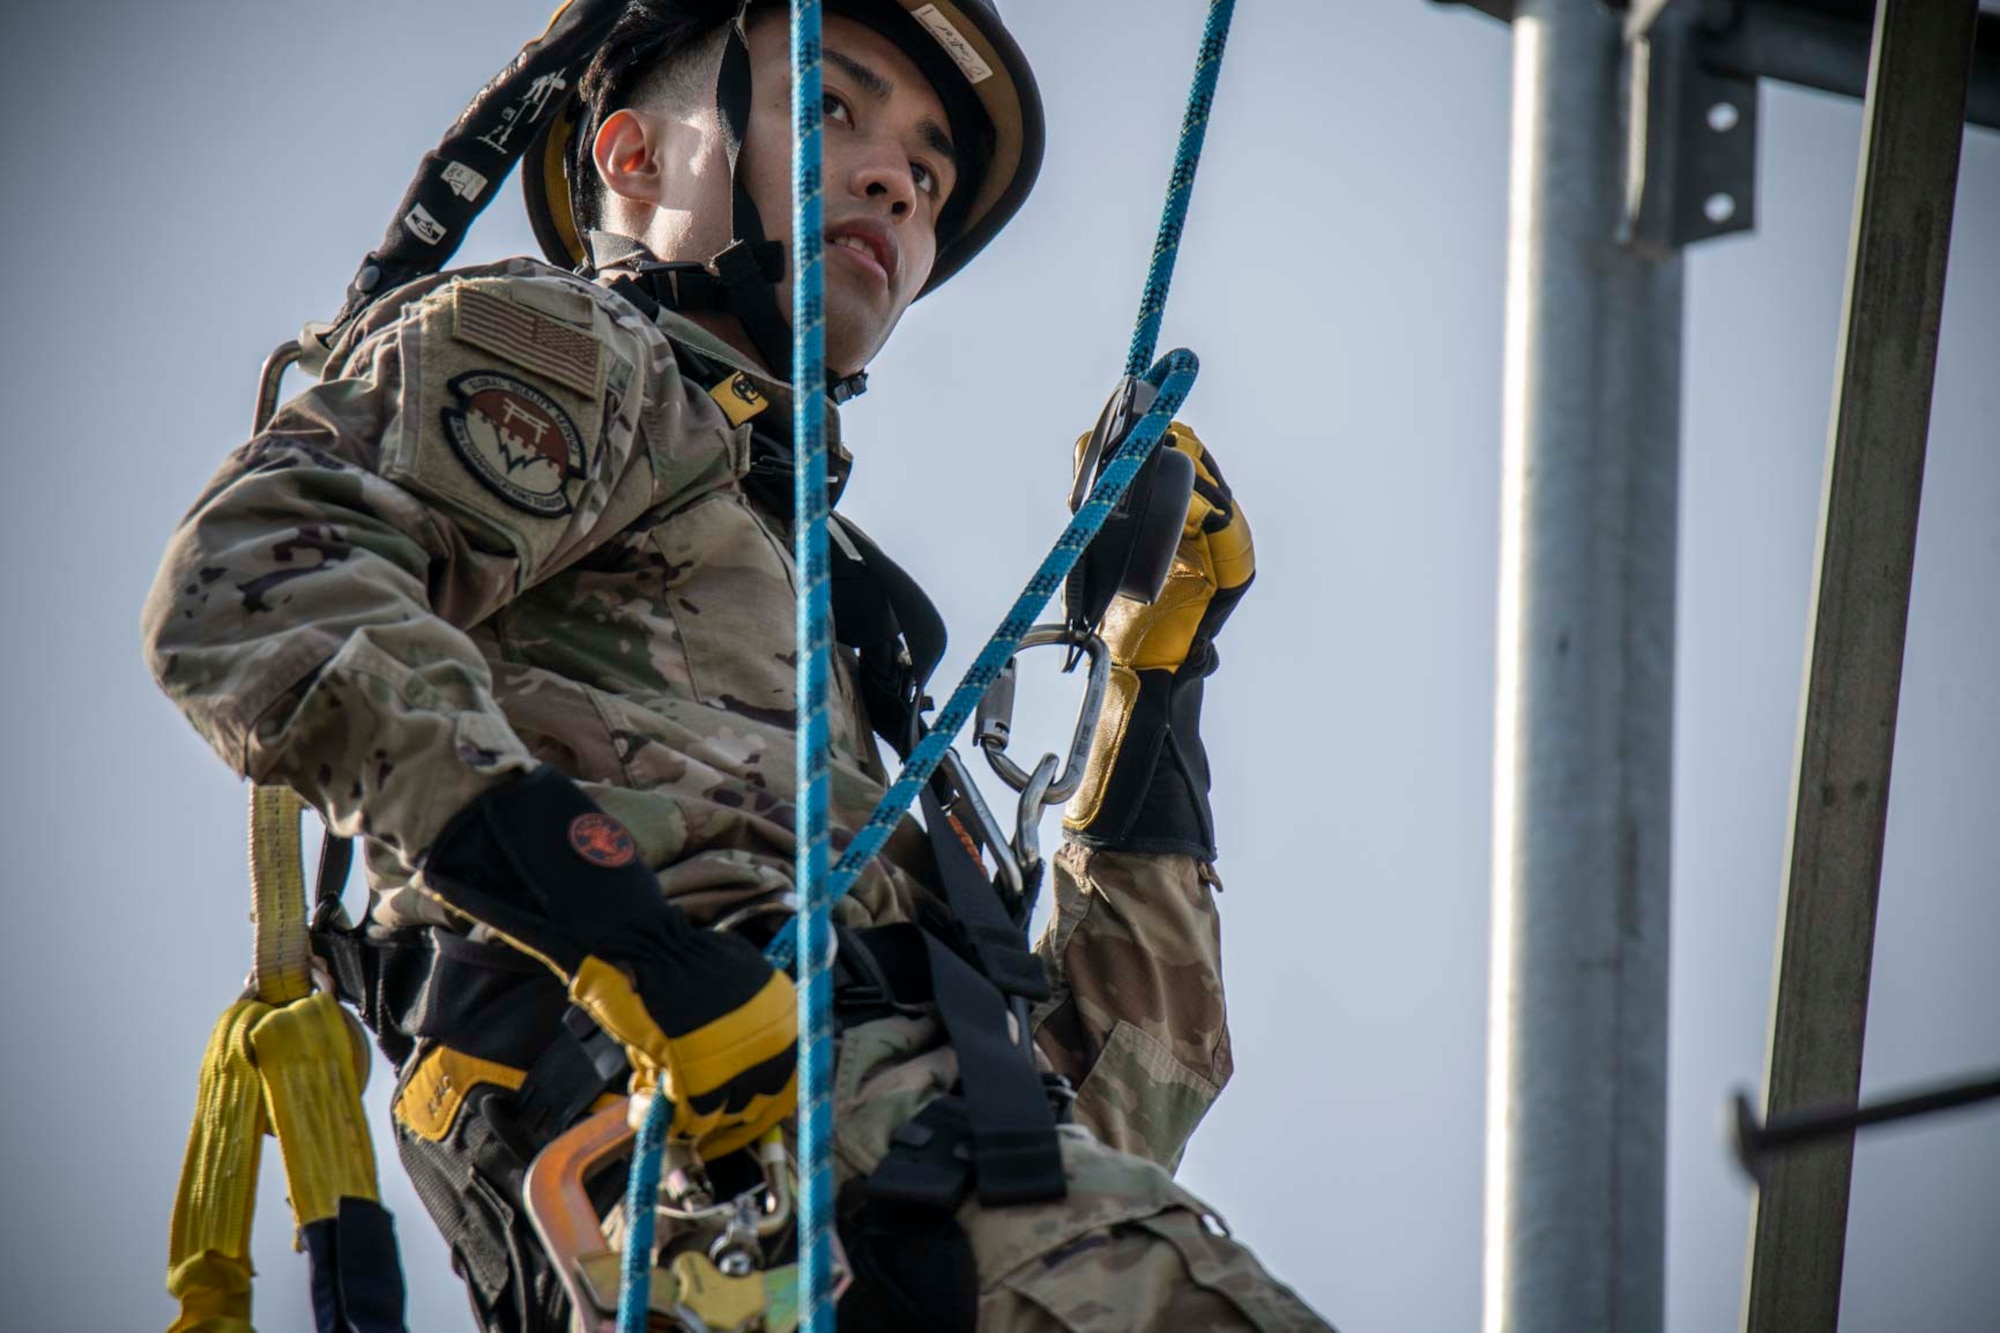 A military member repels down a tower.